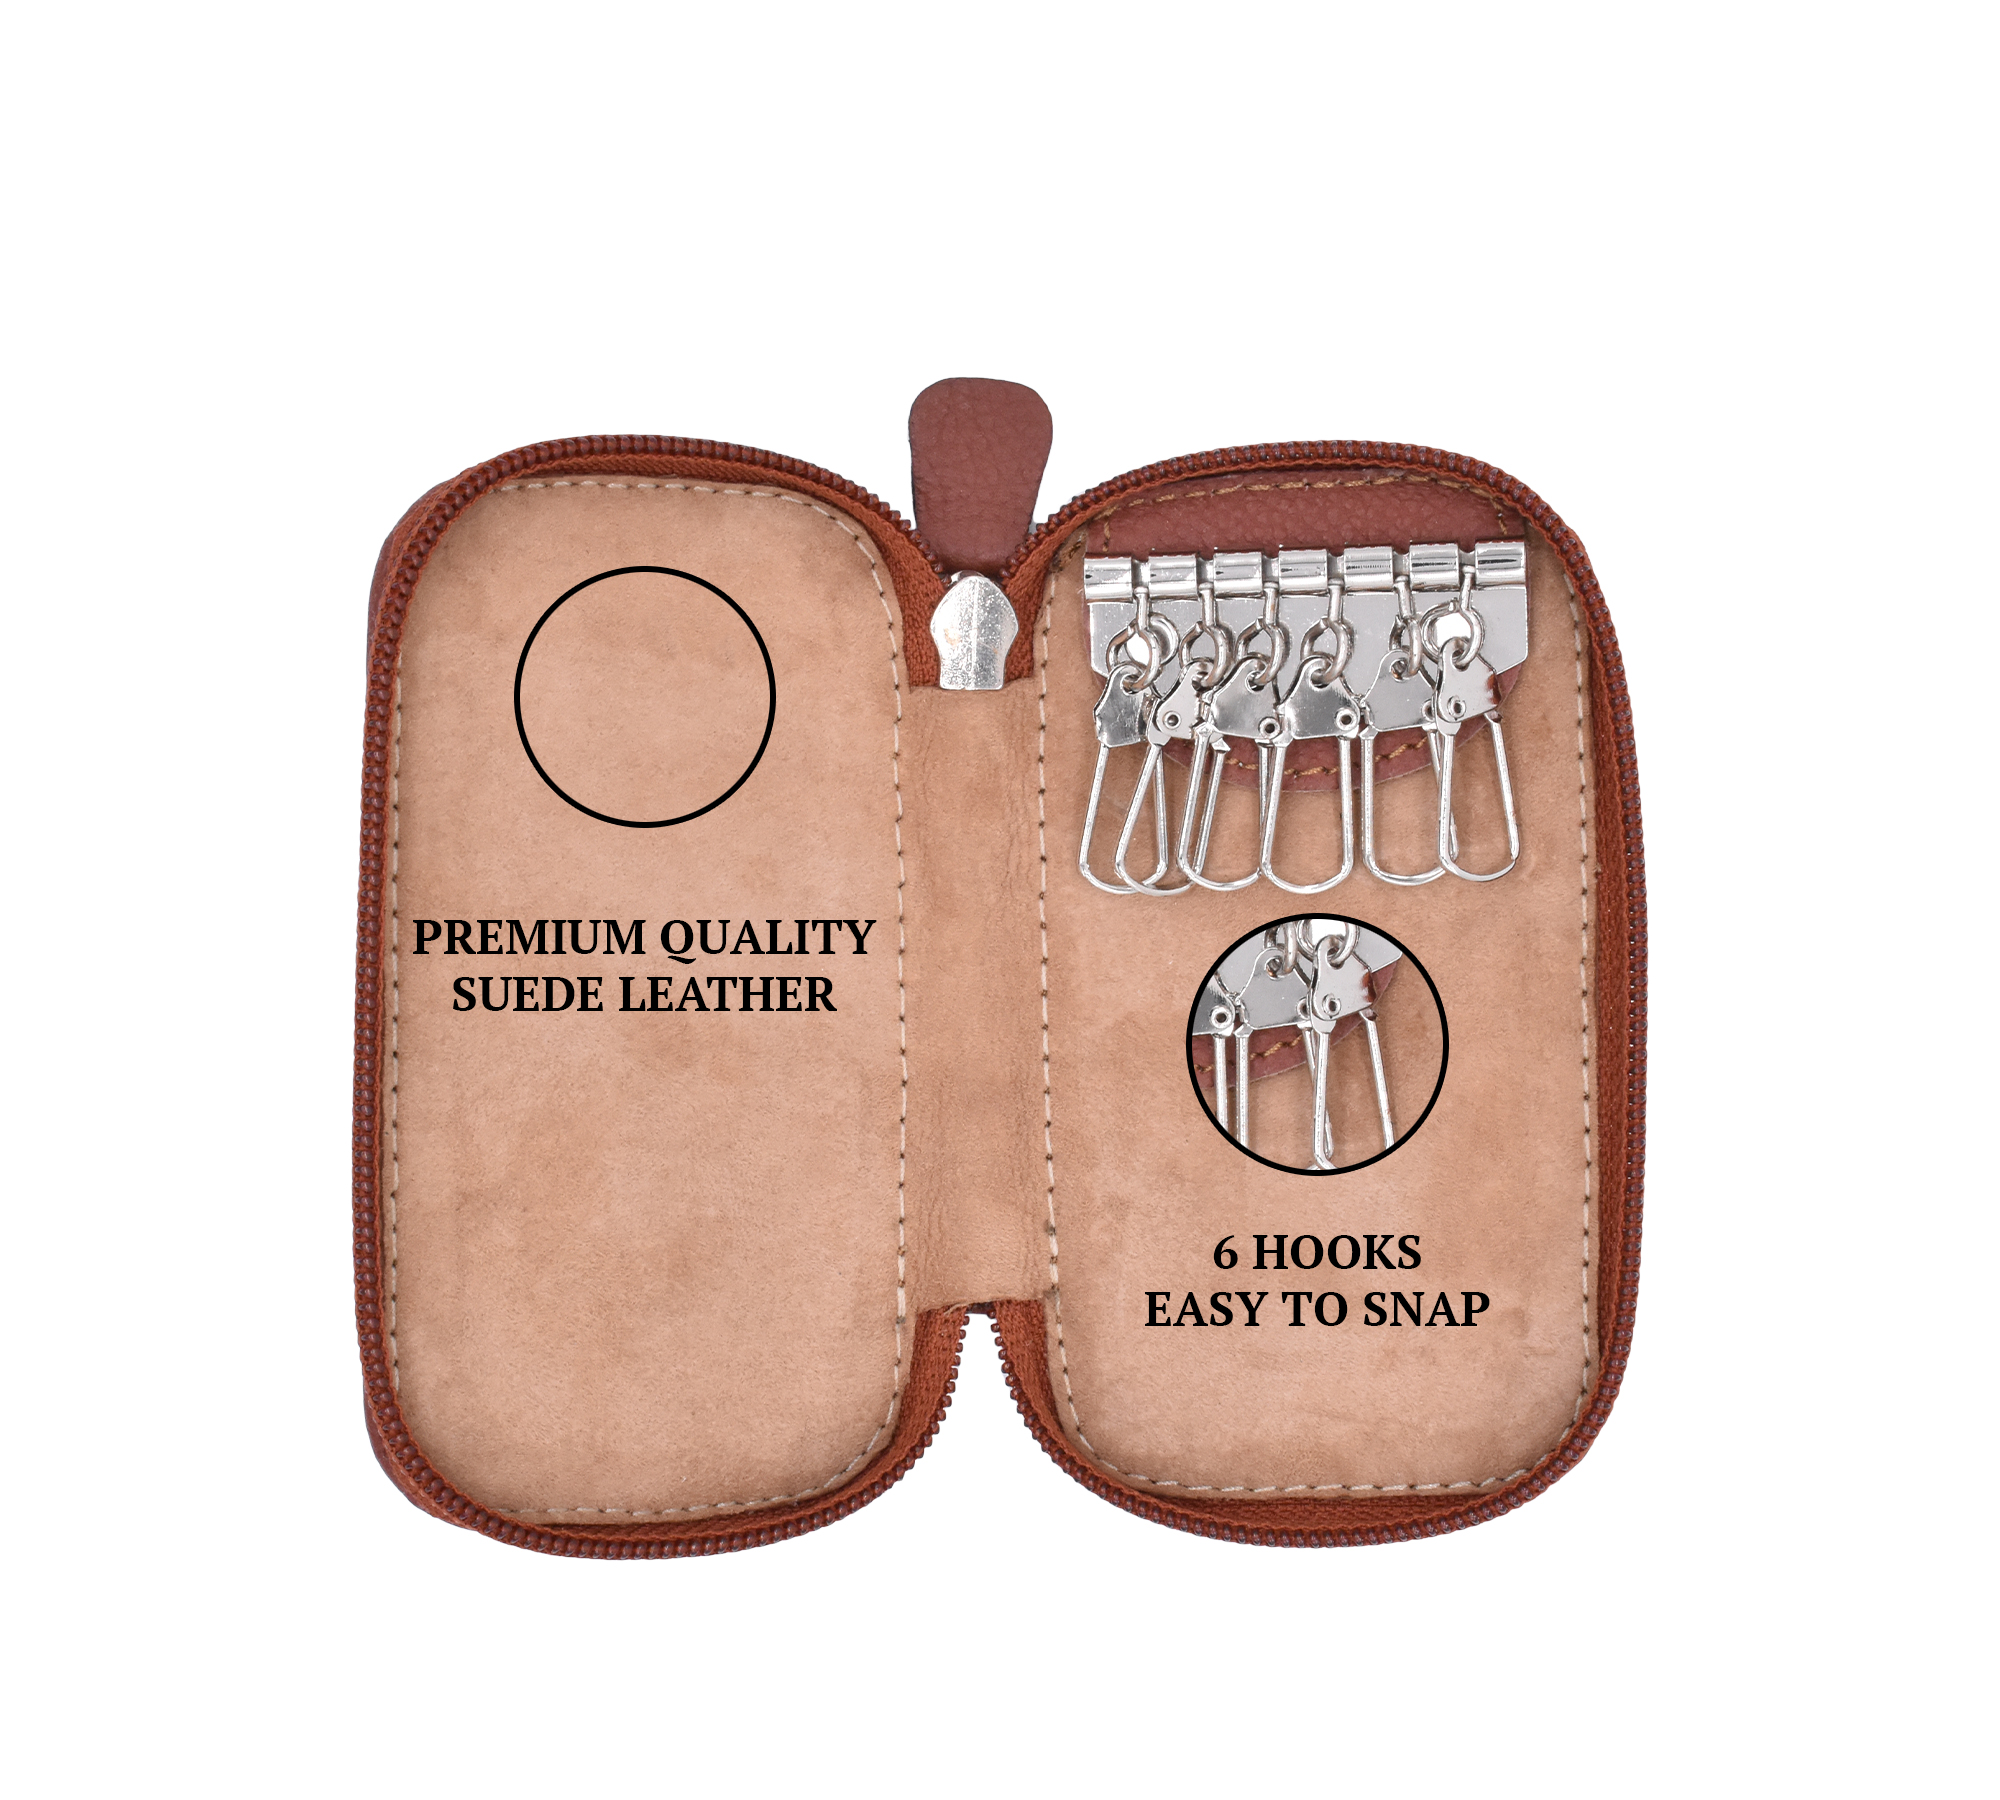 W55--Keycase with zipper closing in Genuine Leather - Tan